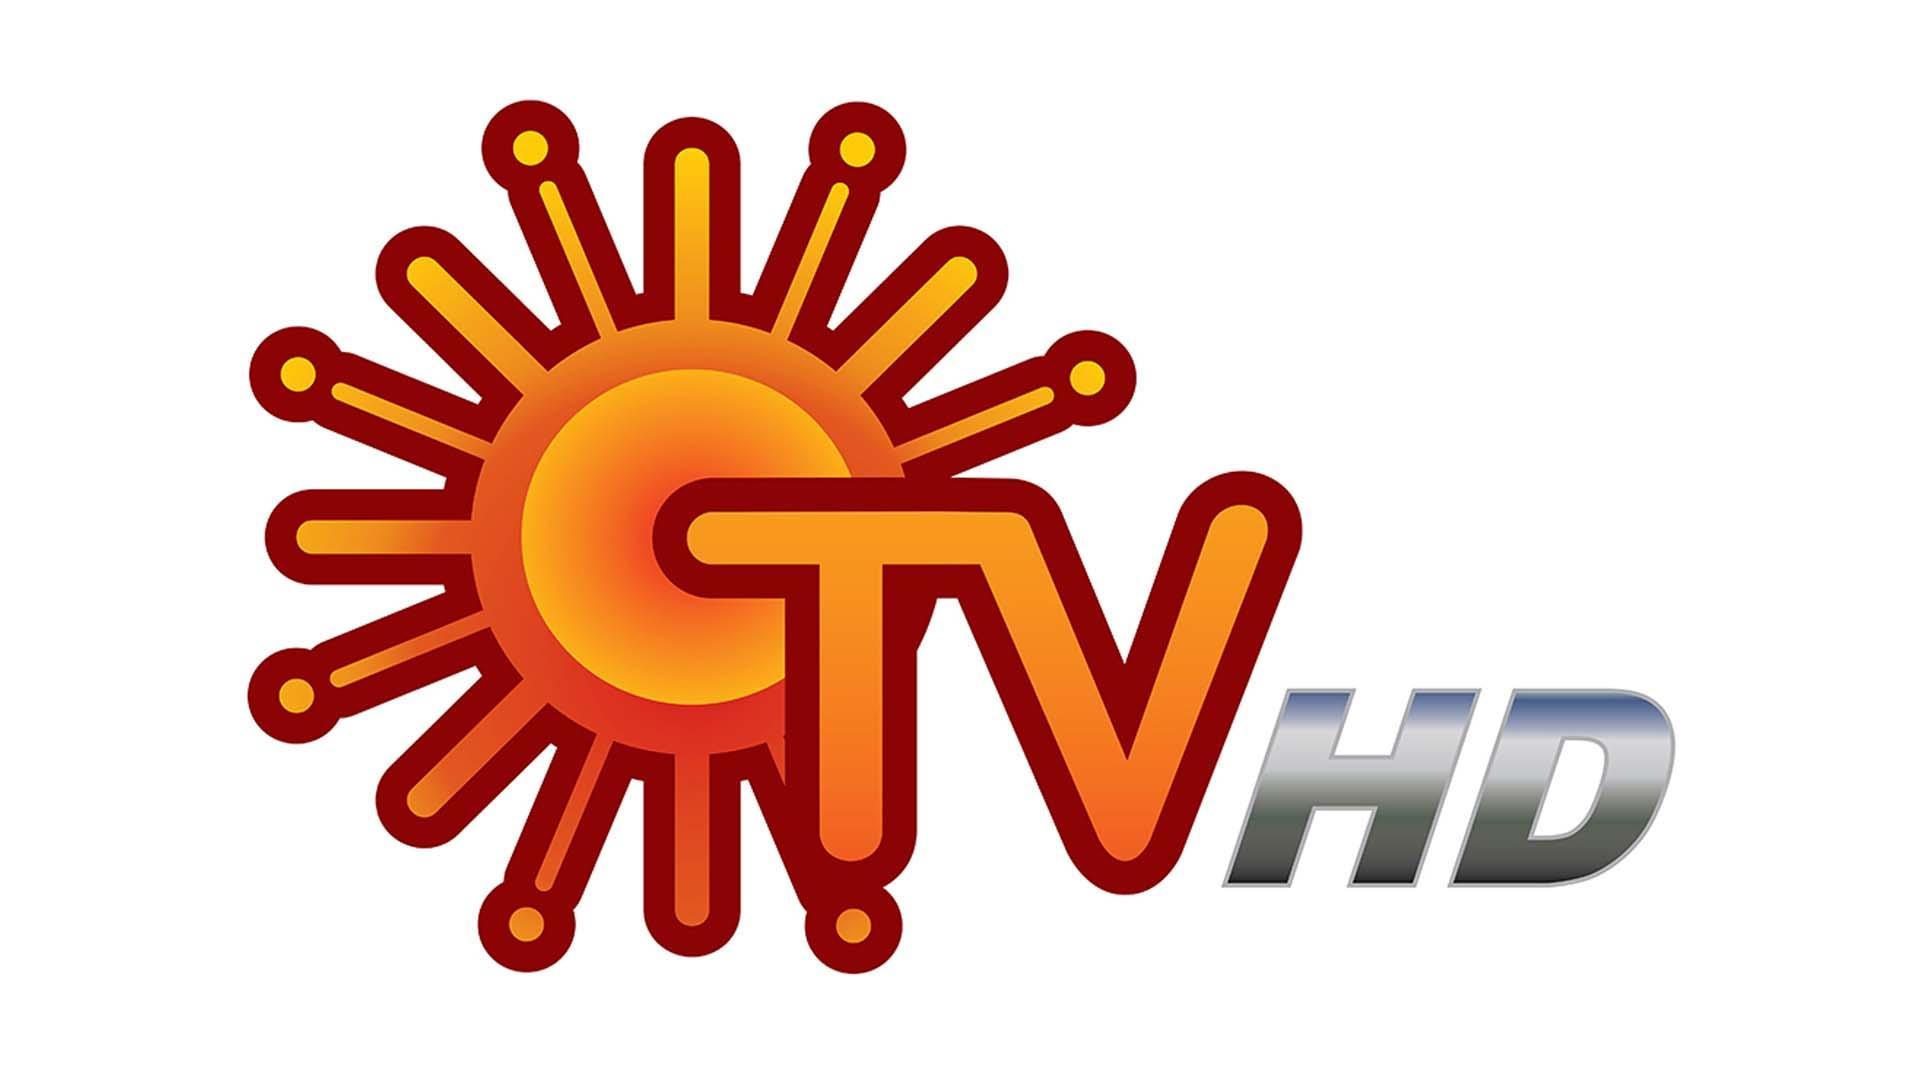 Watch Sun TV HD (Tamil) Live Streaming Online